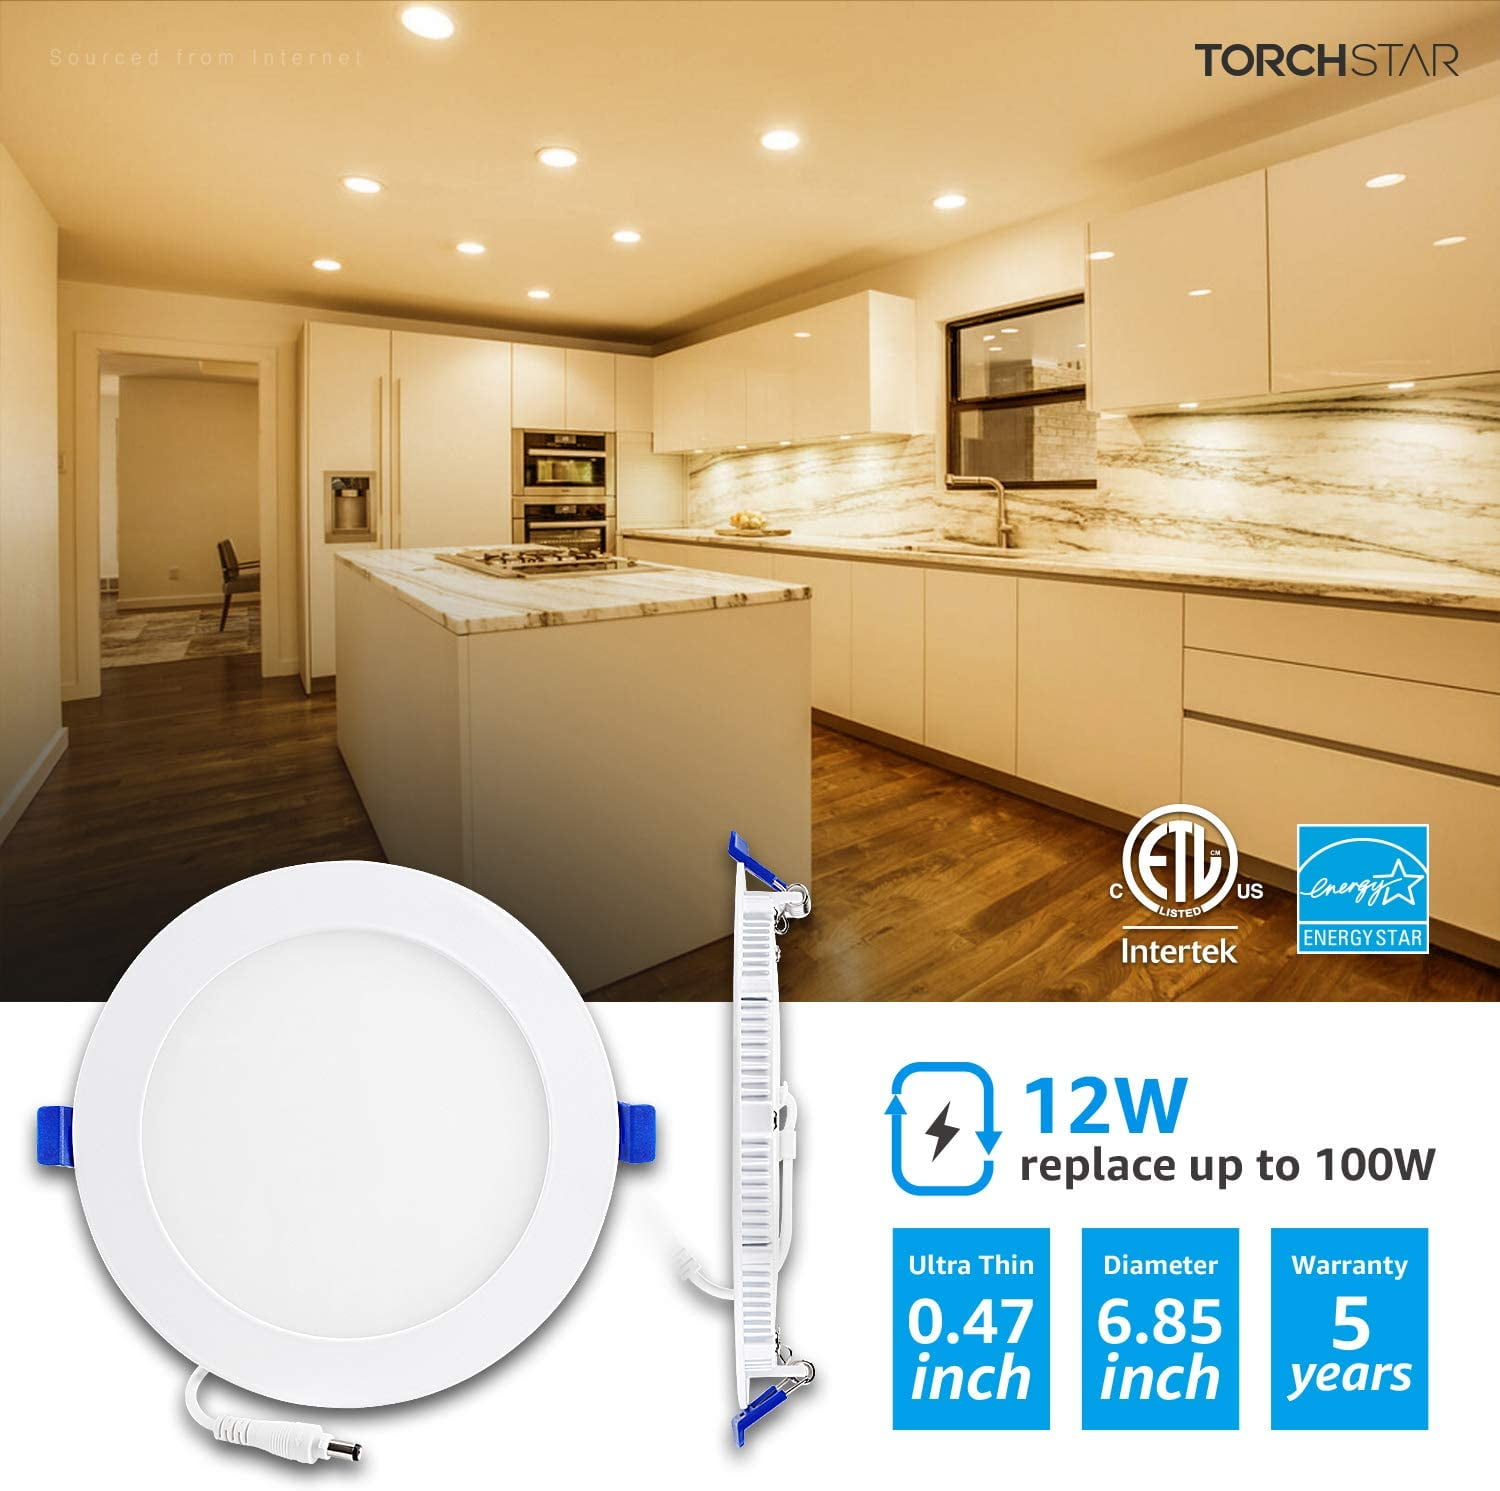 TORCHSTAR Basic Series 12W Inch Low Profile Ultra-Thin Recessed Ceiling Light with Junction Box, 3000K Warm White, Dimmable Can-Killer Dow - 2